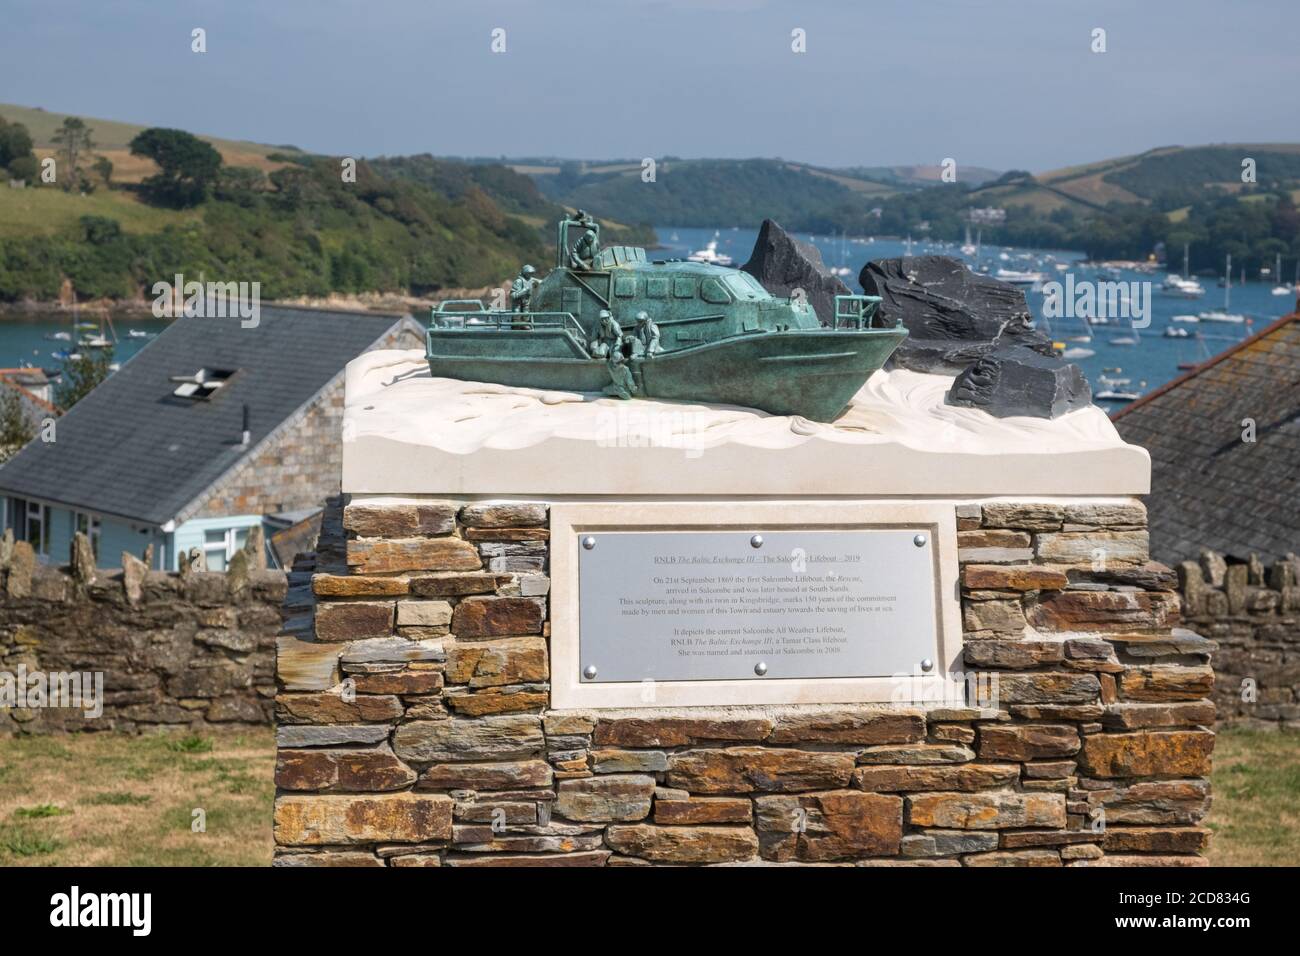 Sculpture of RNLB Baltic Exchange lll marking 150 years of lifeboats in Salcombe, Devon, UK Stock Photo